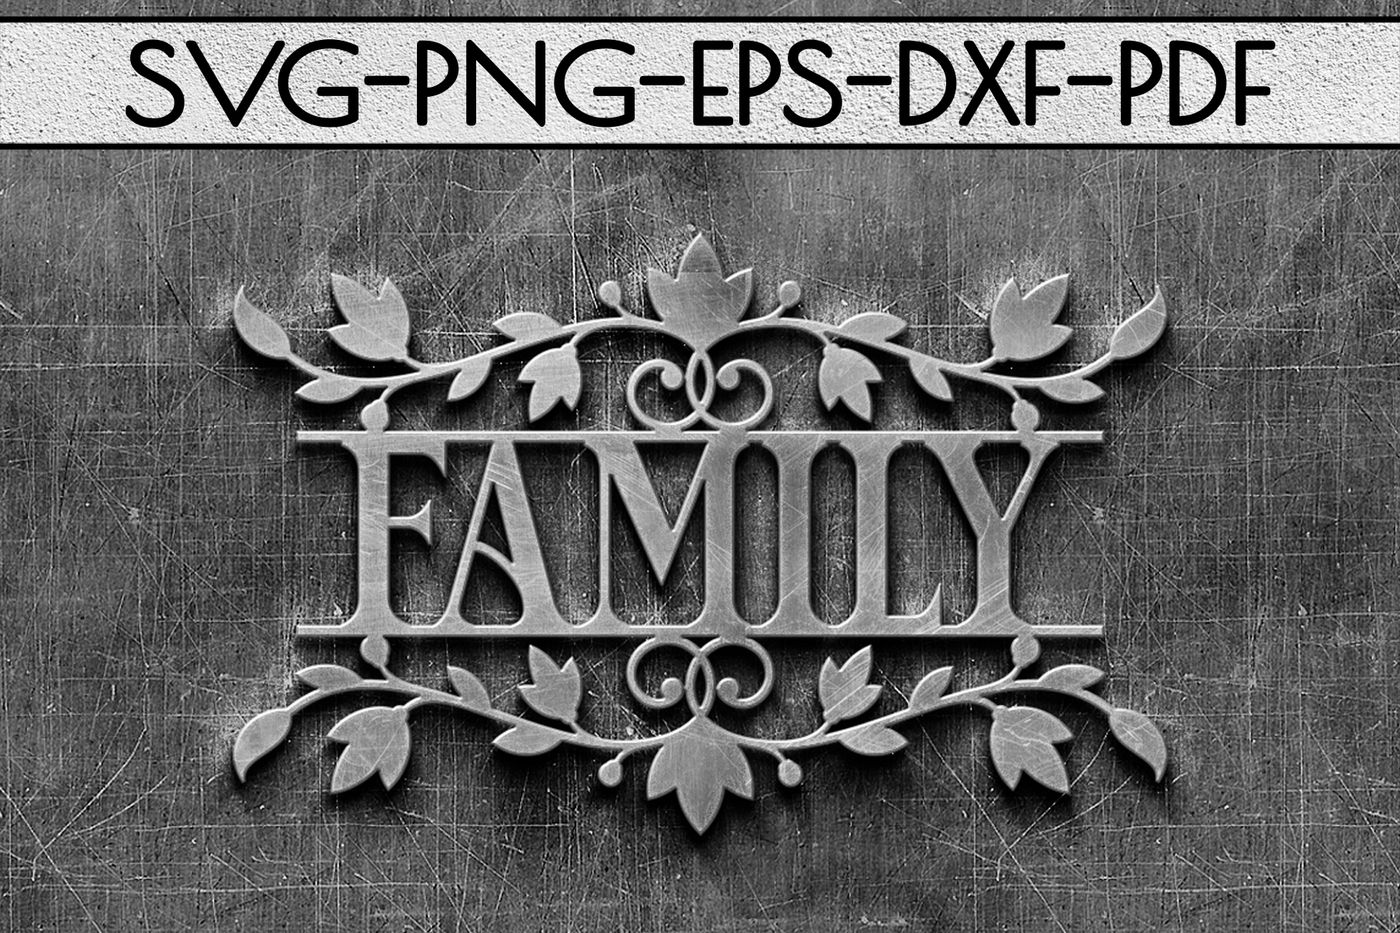 Download Family Sign Papercut Template, Home Decor SVG, EPS, PDF By ...